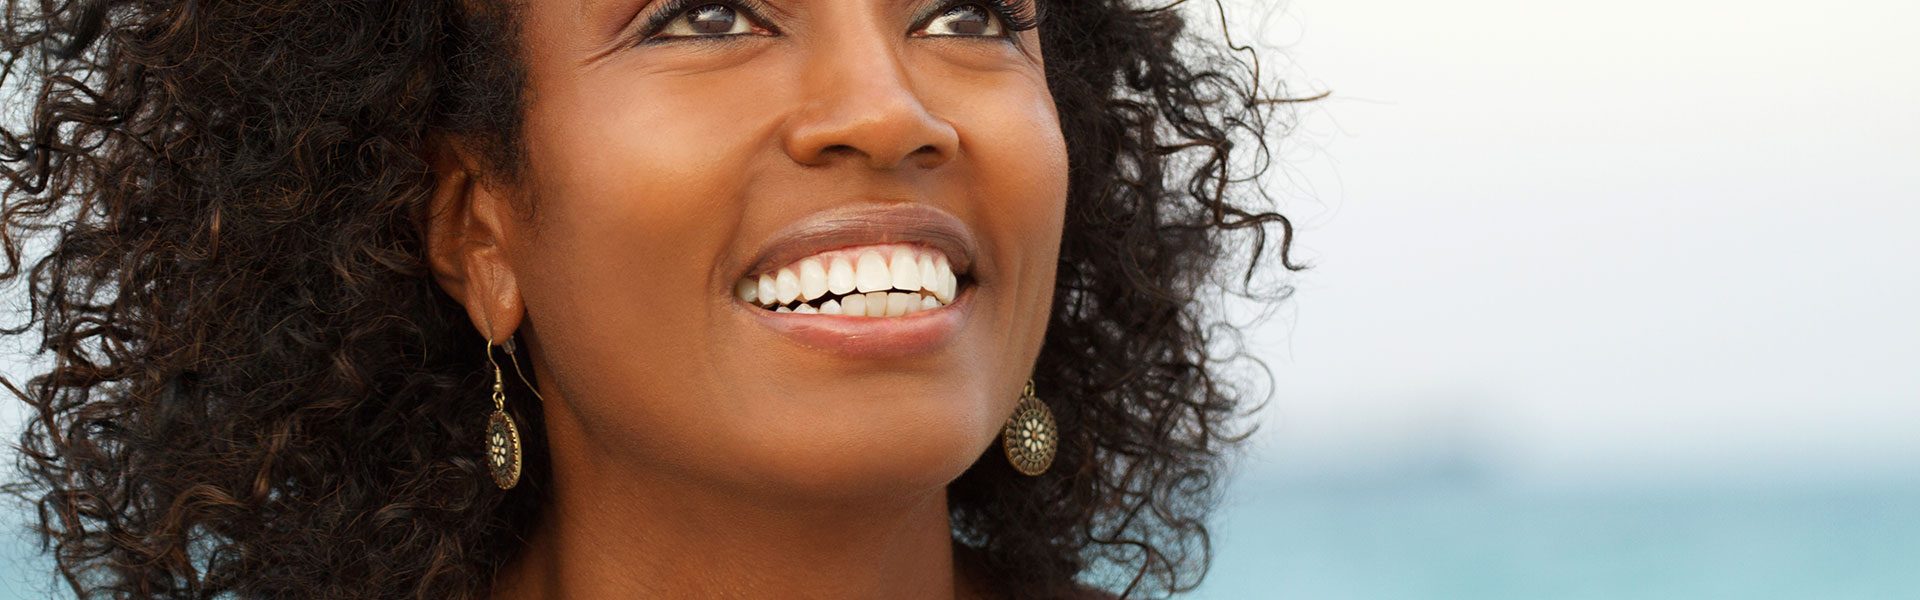 What You Should Know About Teeth Whitening